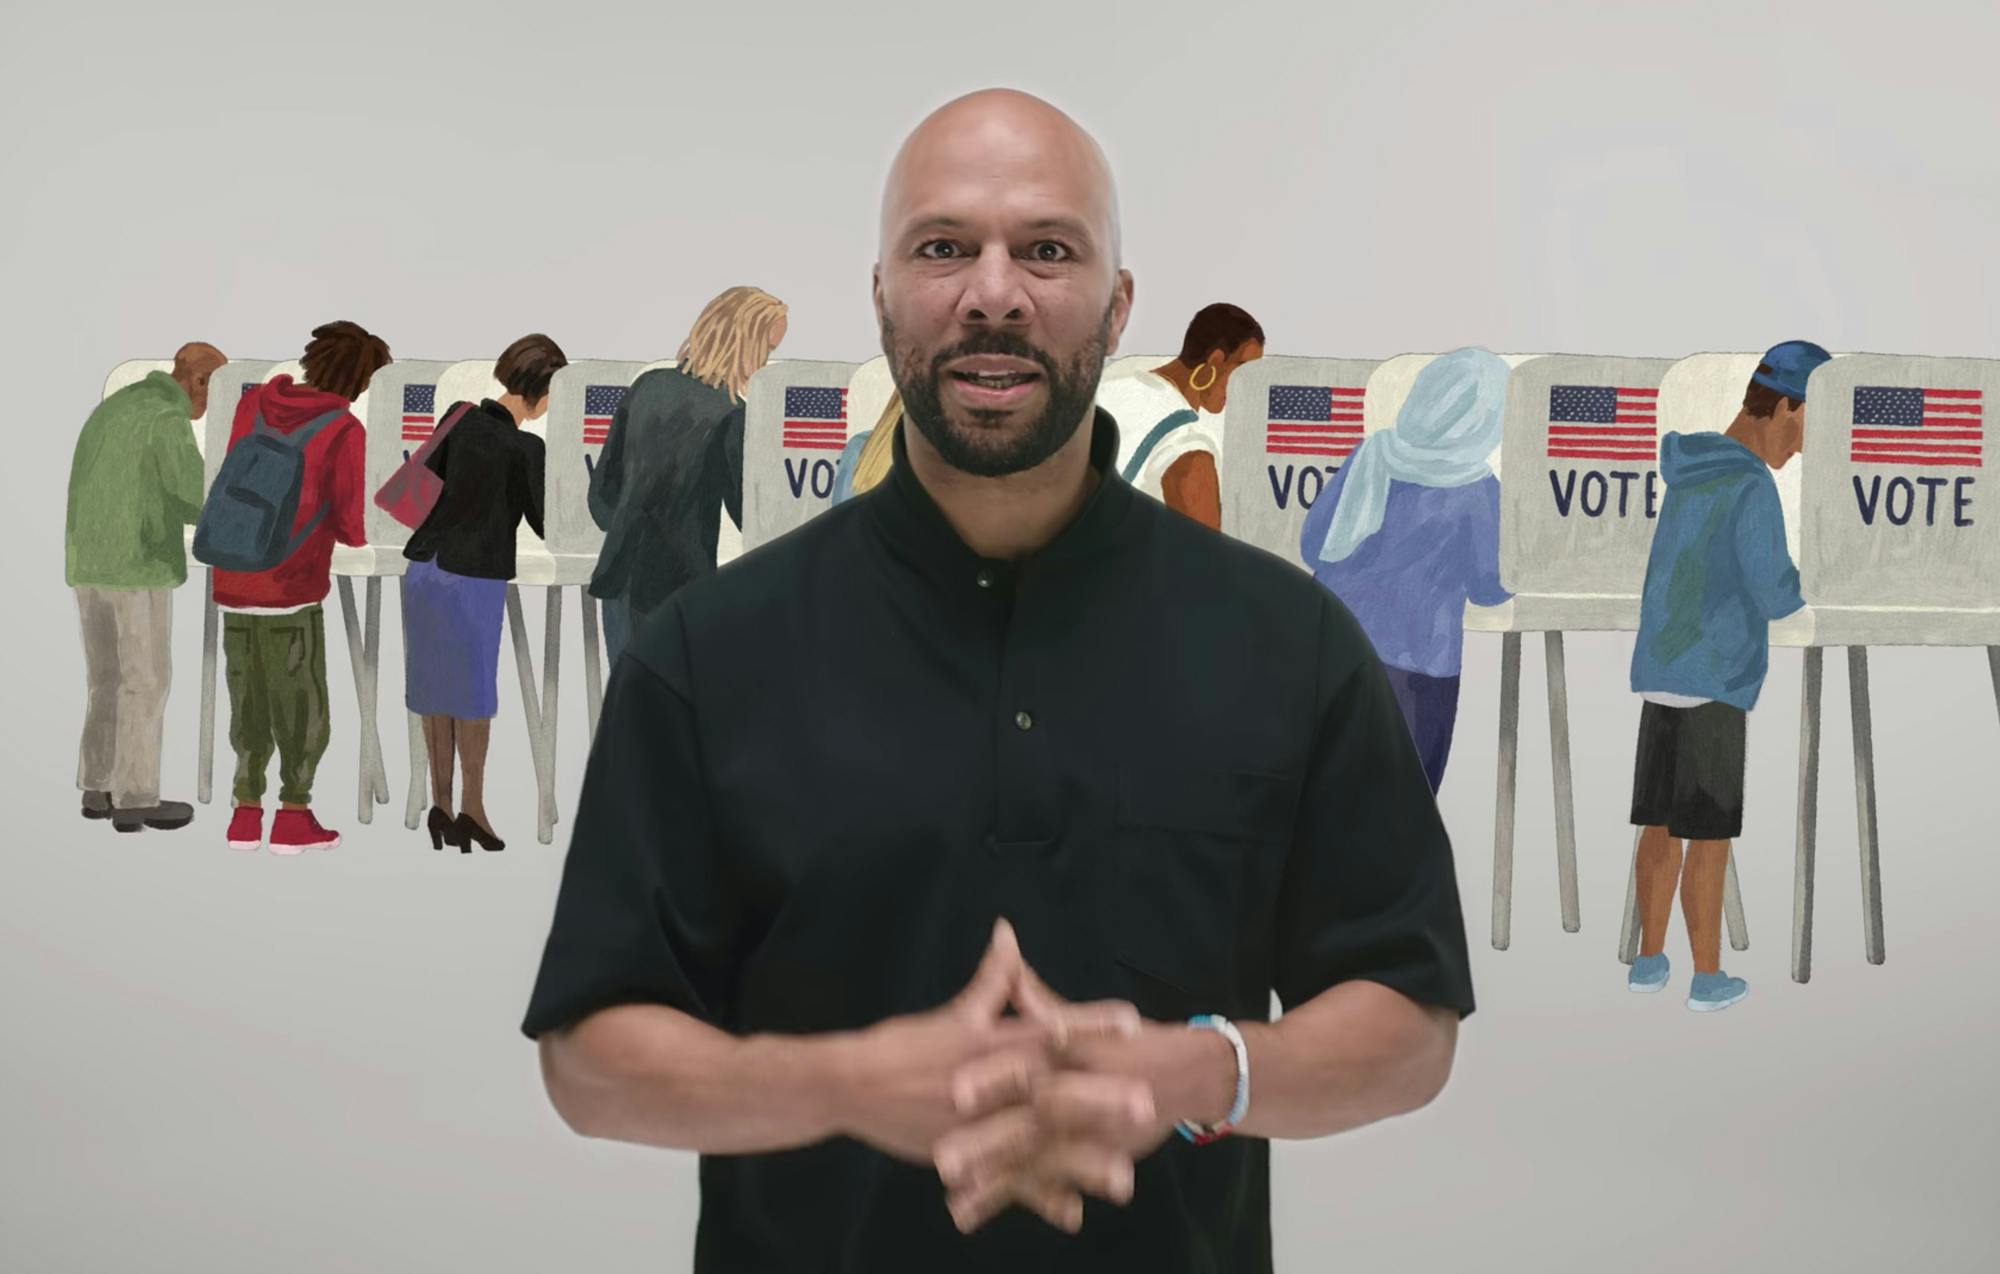 A man standing in front of voters and voting booths